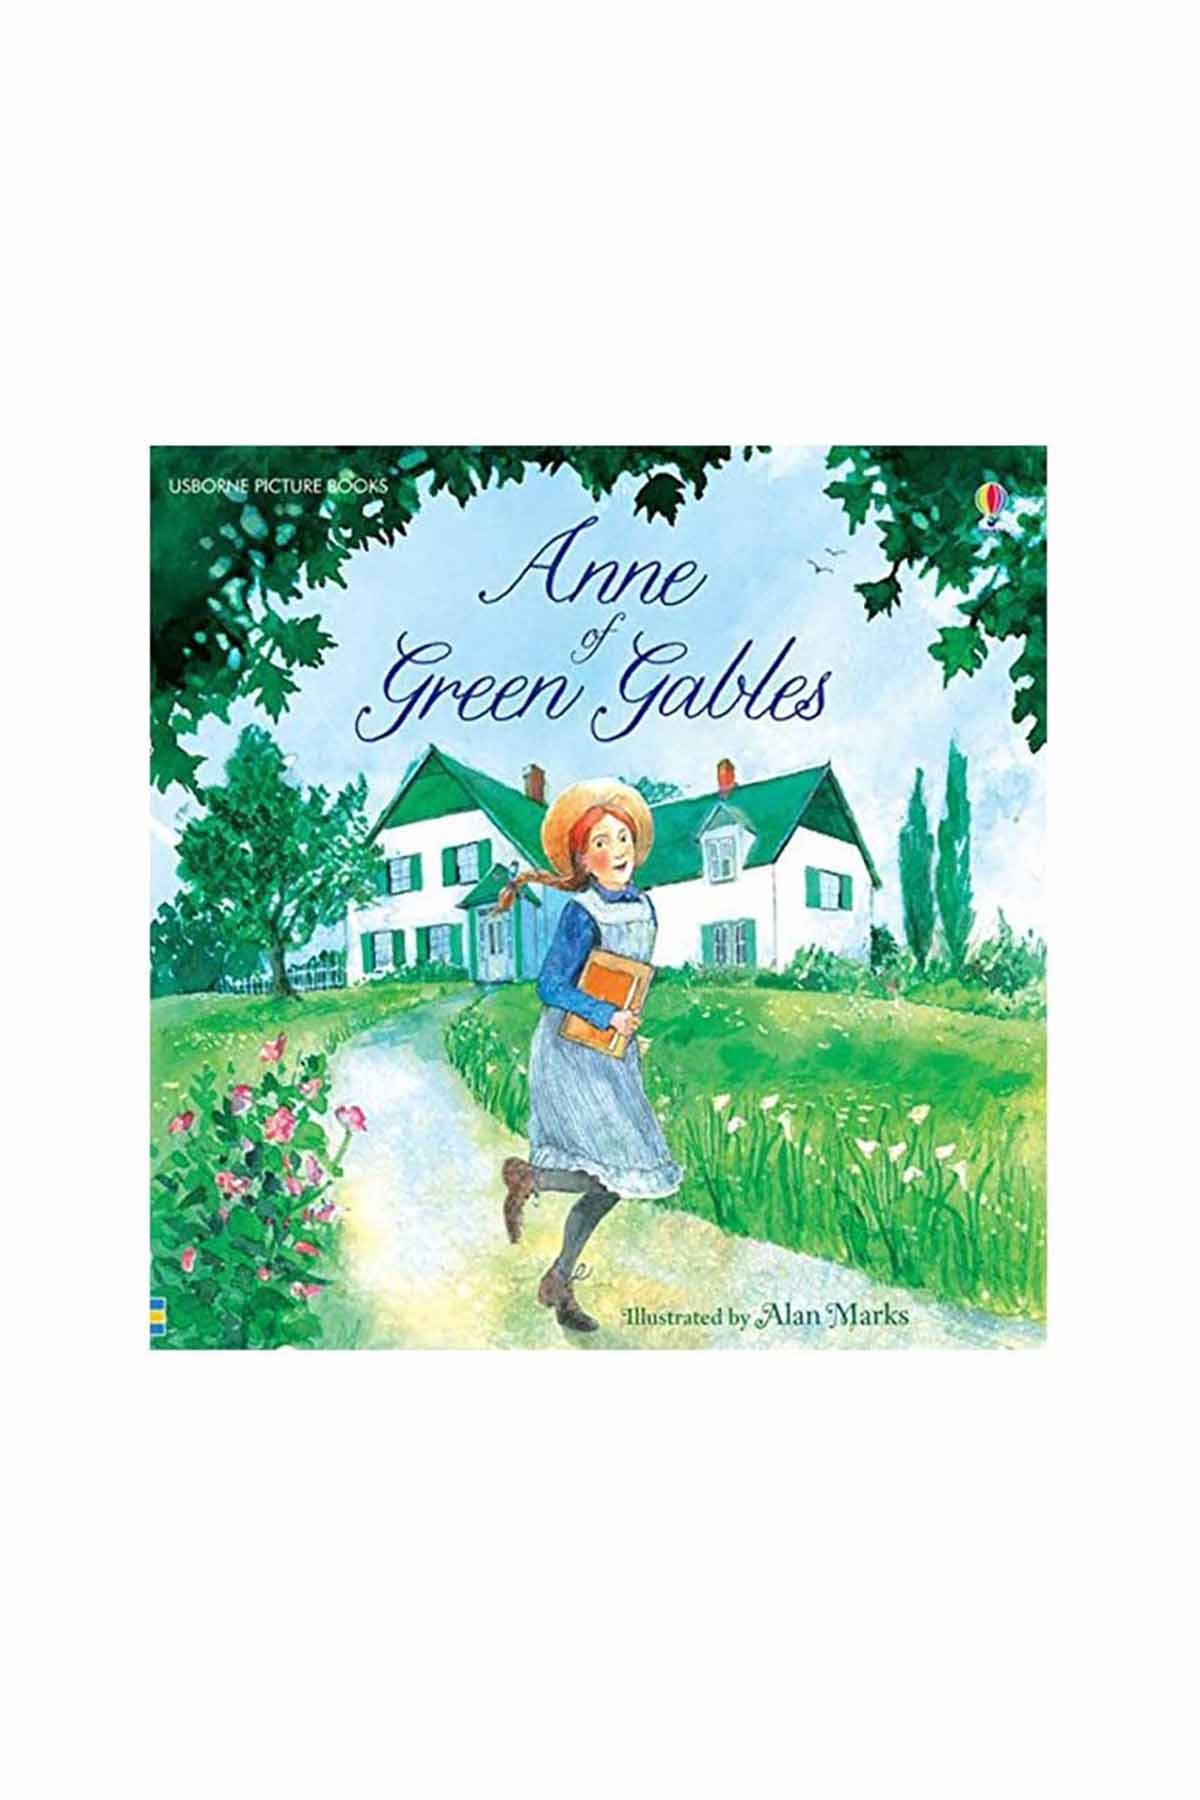 The Usborne Anne Green and Gables